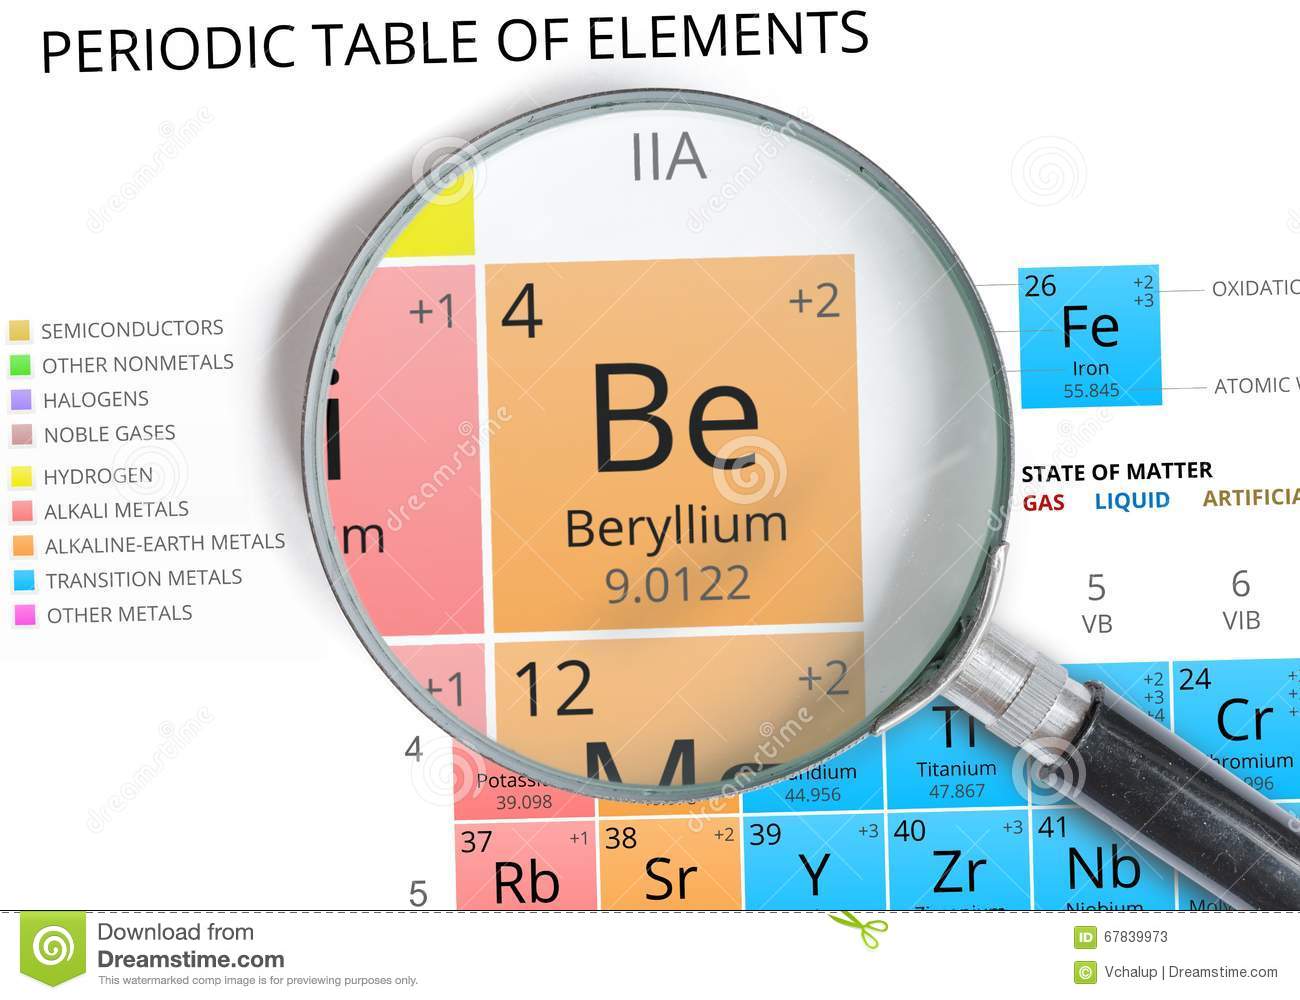 https://www.dreamstime.com/stock-illustration-beryllium-symbol-be-element-periodic-table-zoomed-magnifying-glass-image67839973